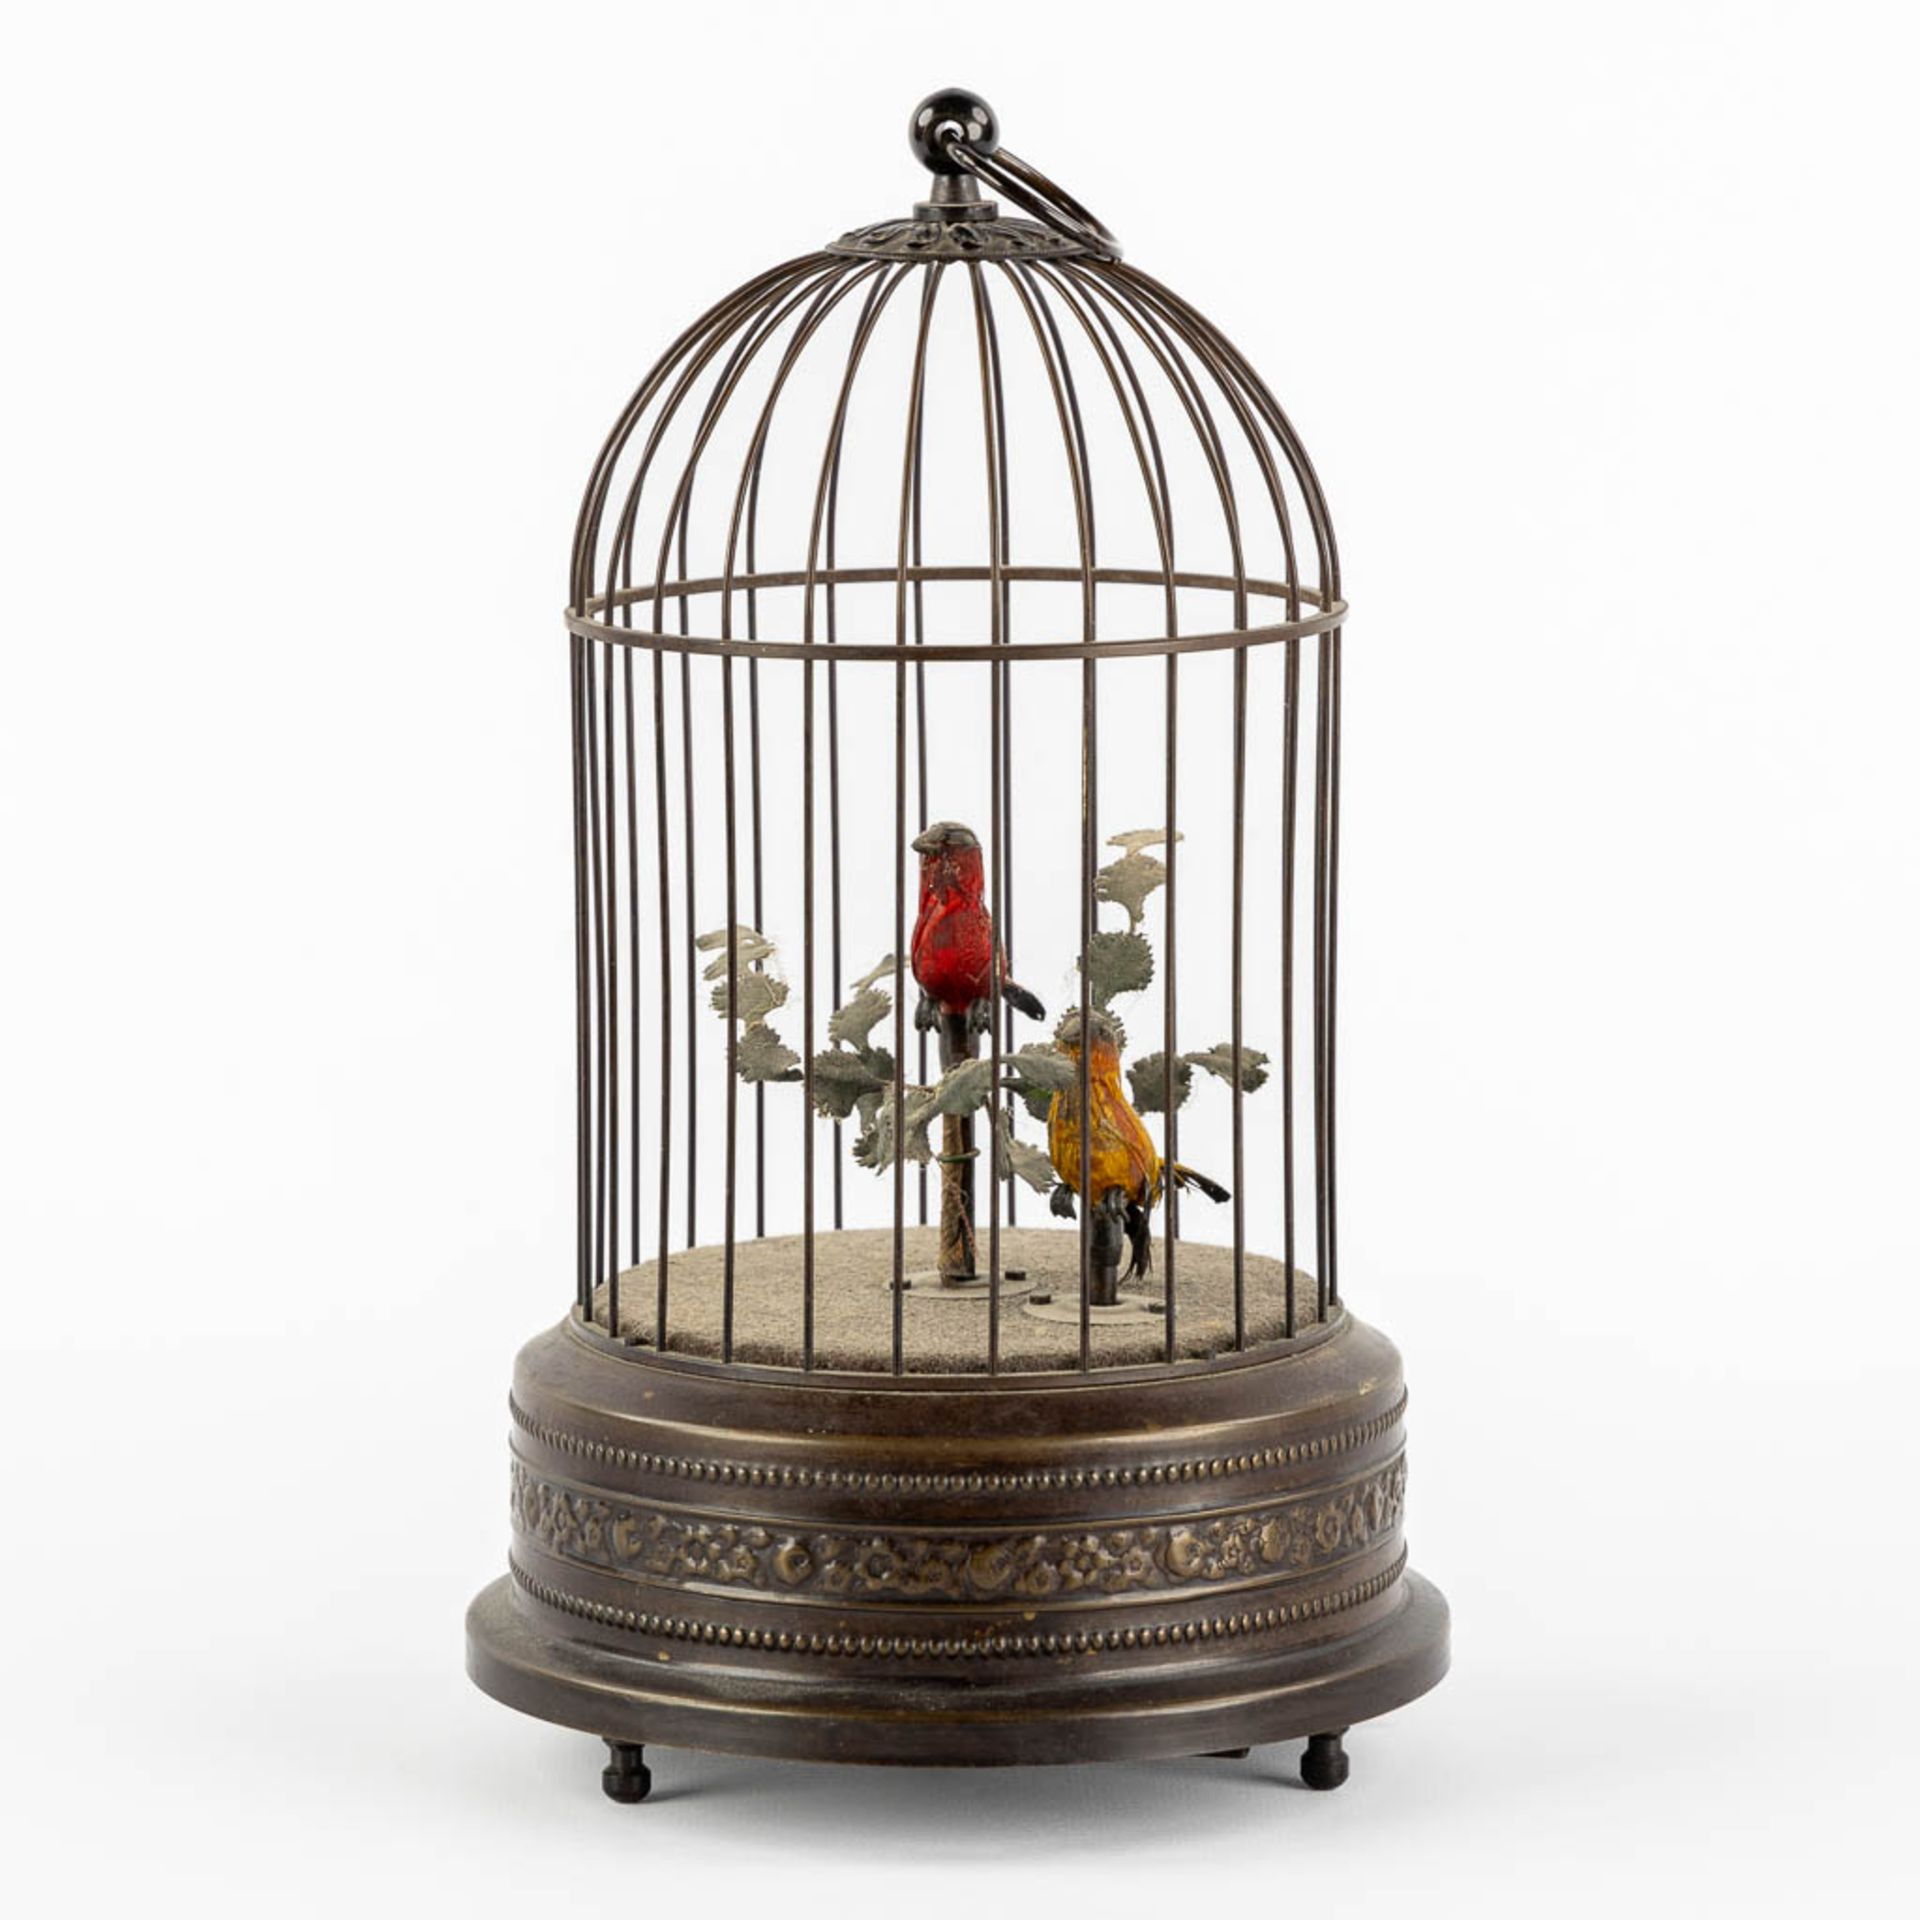 A brass bird-cage automata with two singing birds. (H:28 x D:16 cm) - Image 5 of 9